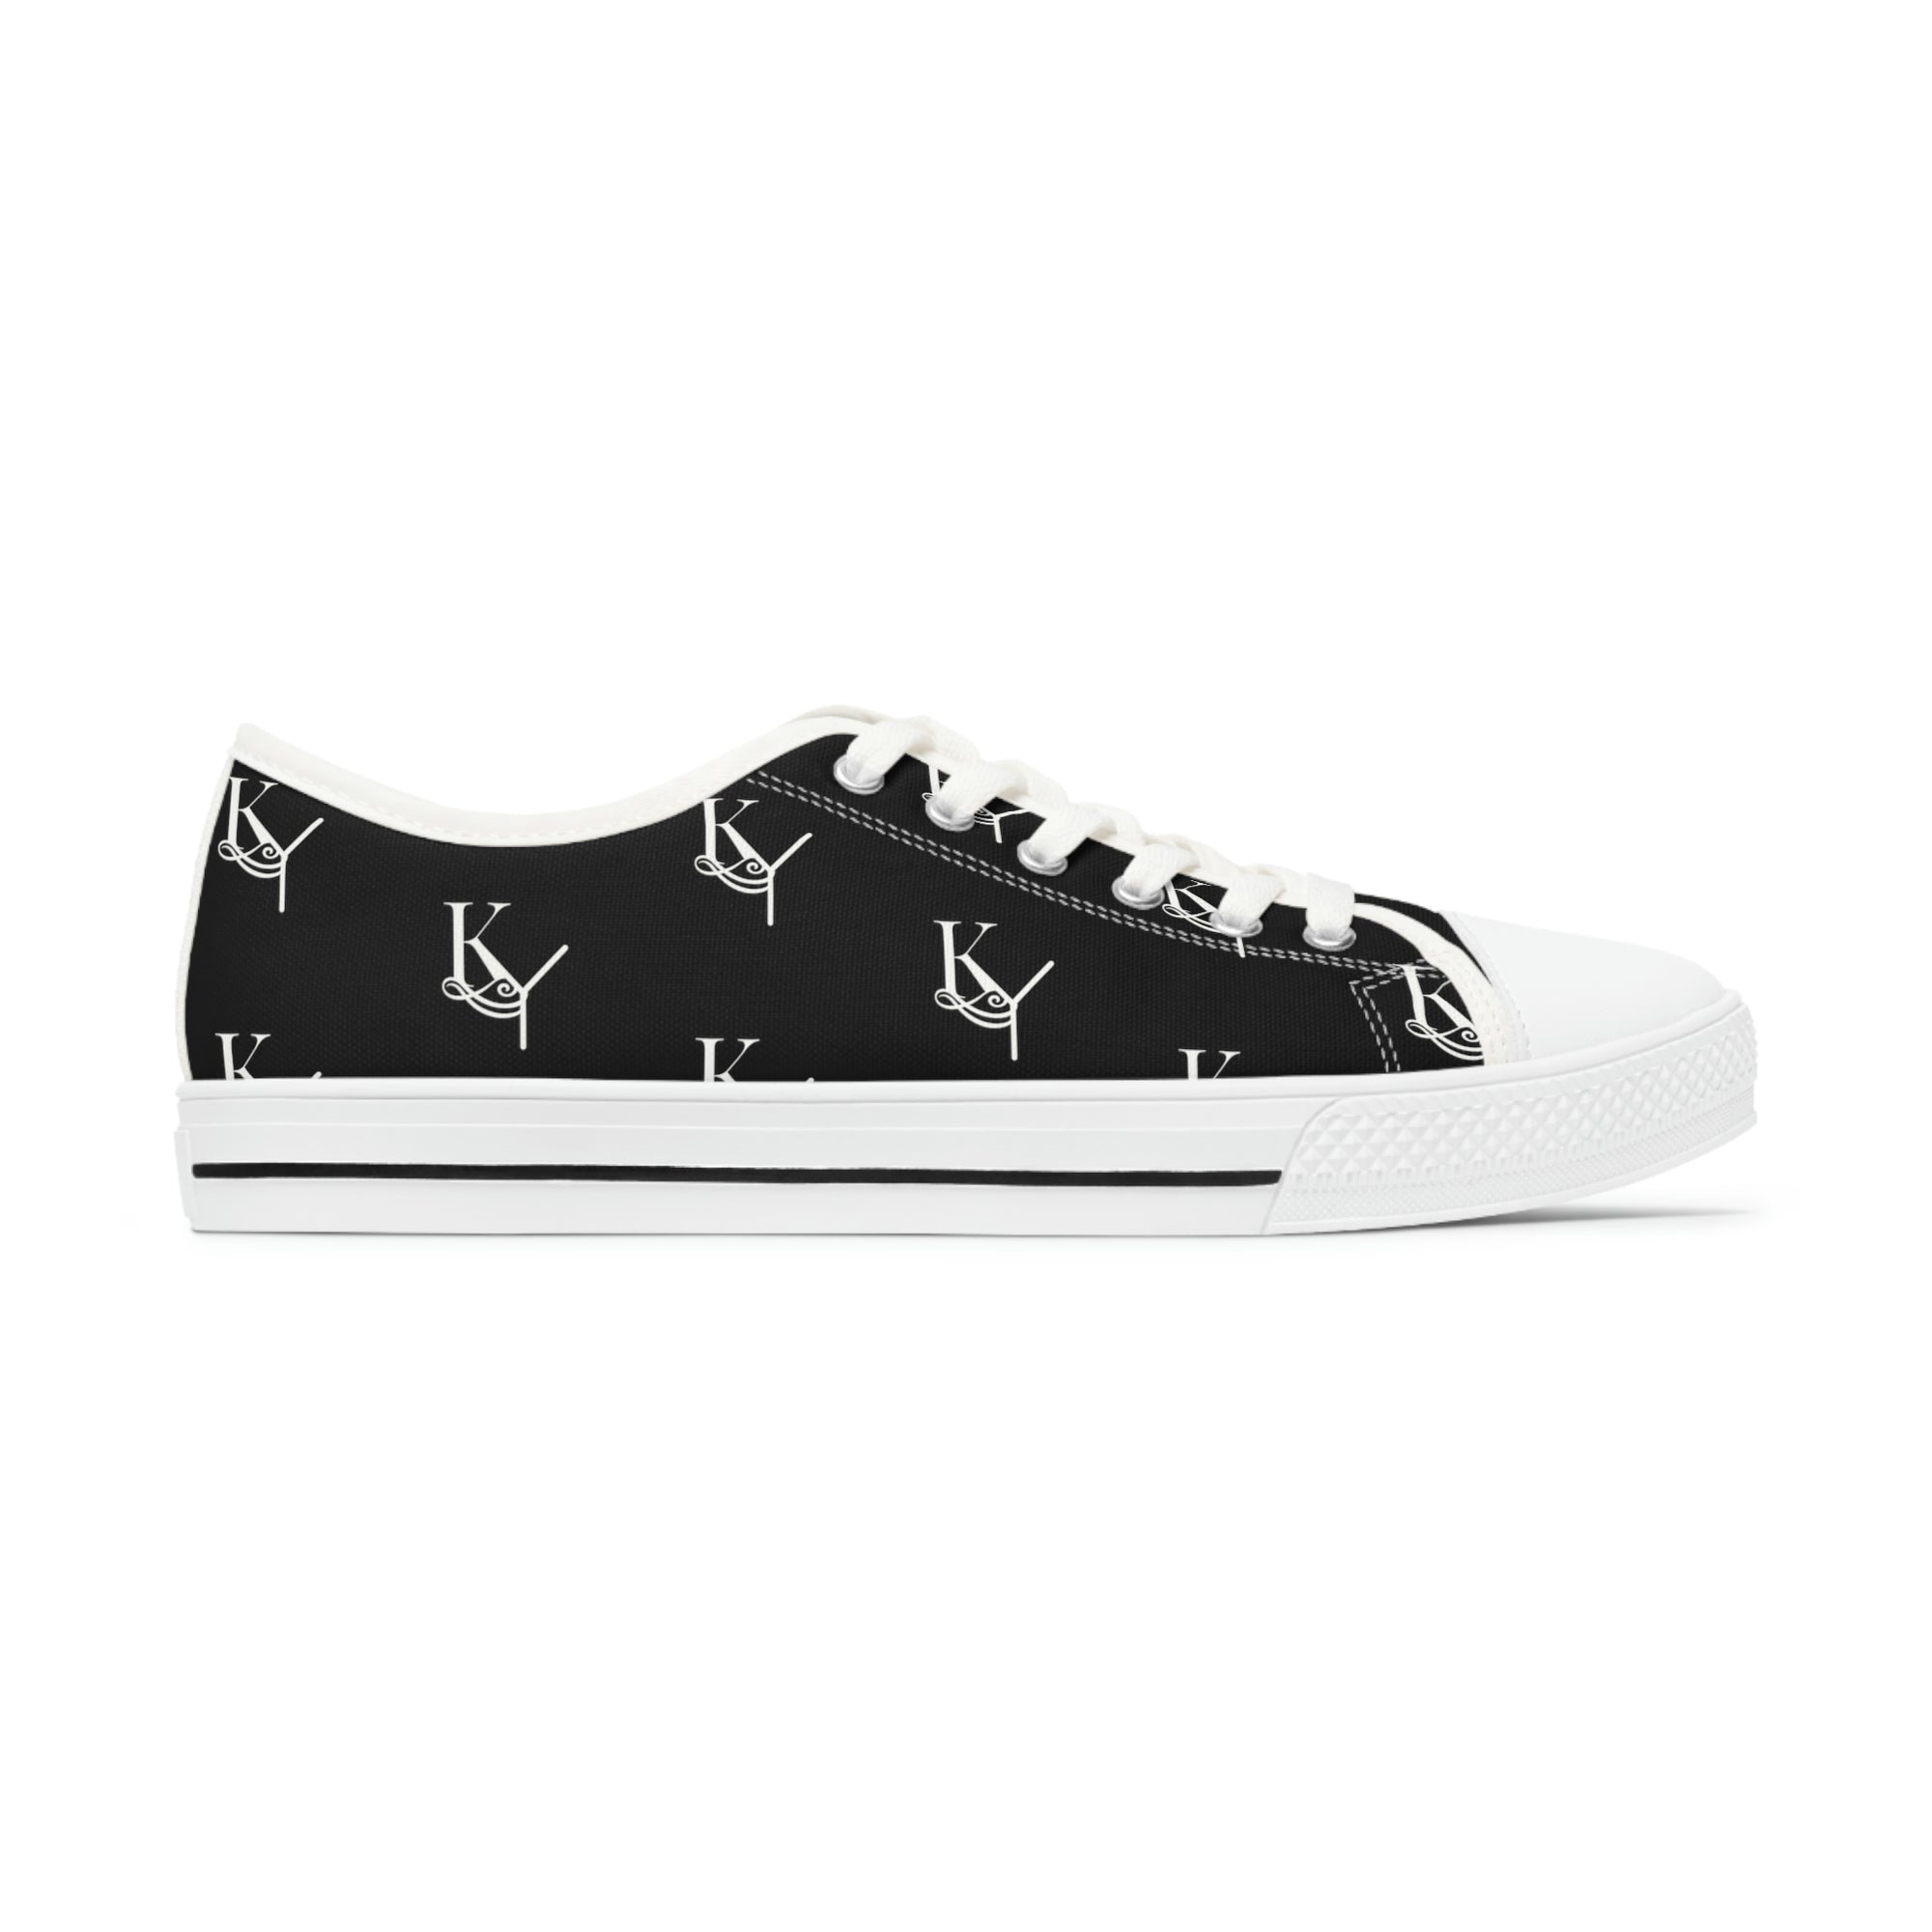 Women's Low Top Sneakers- Black and White